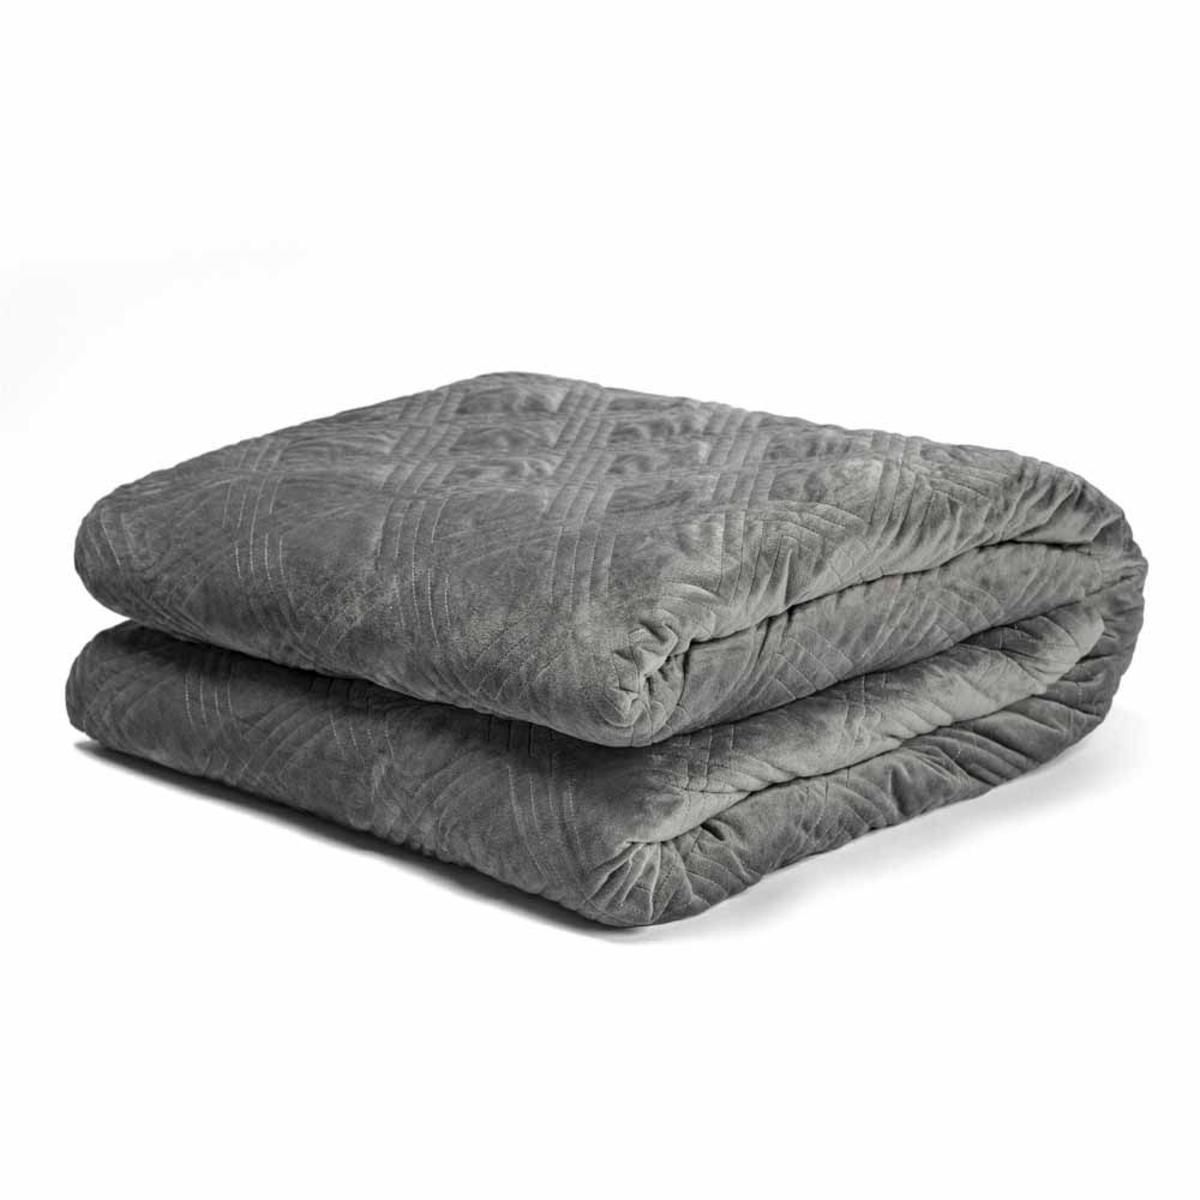 Hush 15 lb Classic Blanket with Duvet Cover - Twin/60x80